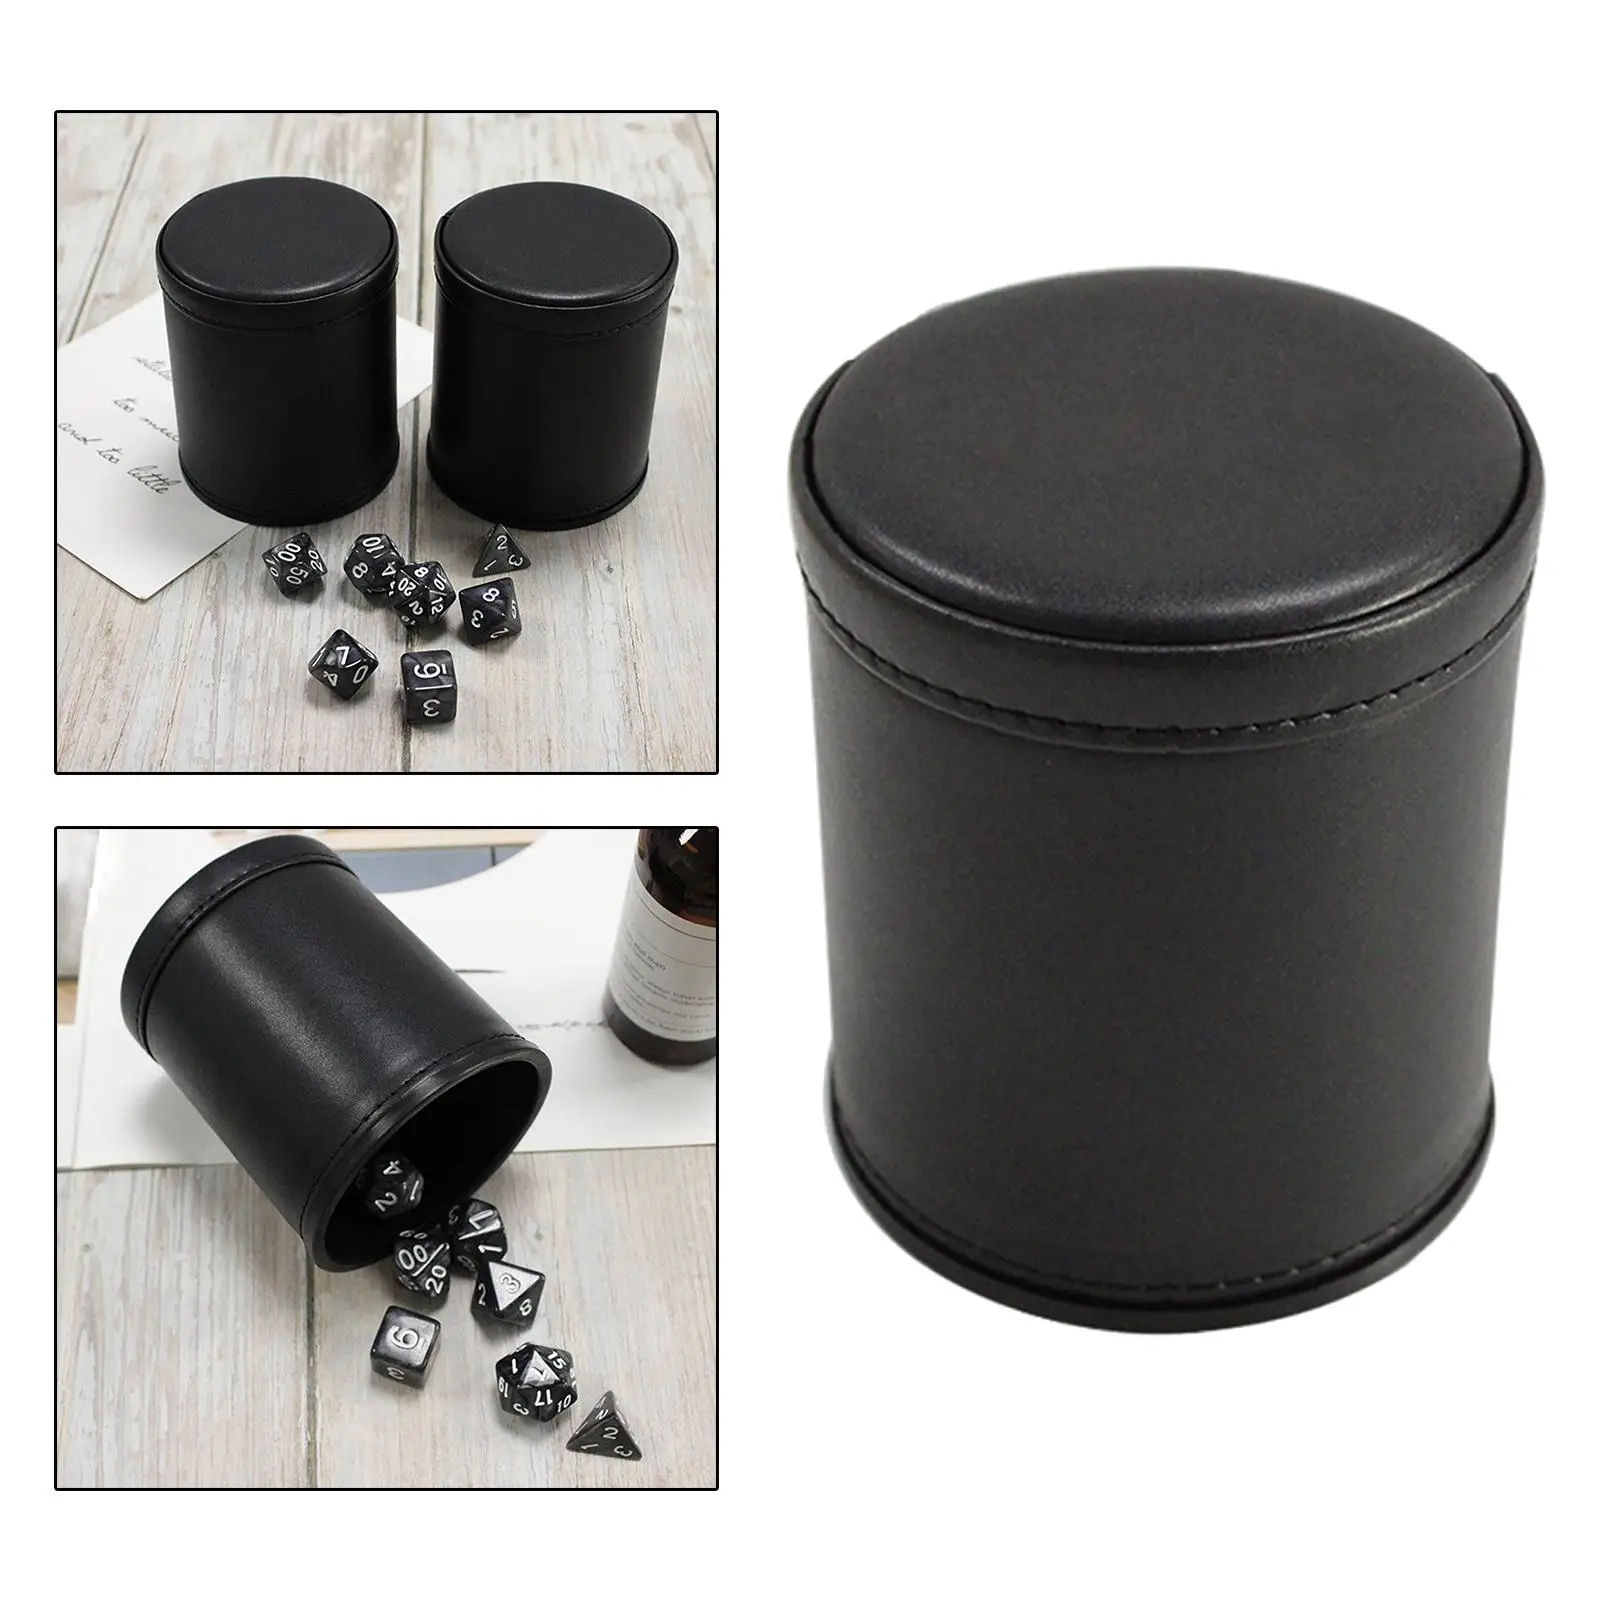 Handheld Dice Cup Dice Game Accessories Entertainment Professional Dice Box Dice Shaker Dice Decider for Club Family Party Home